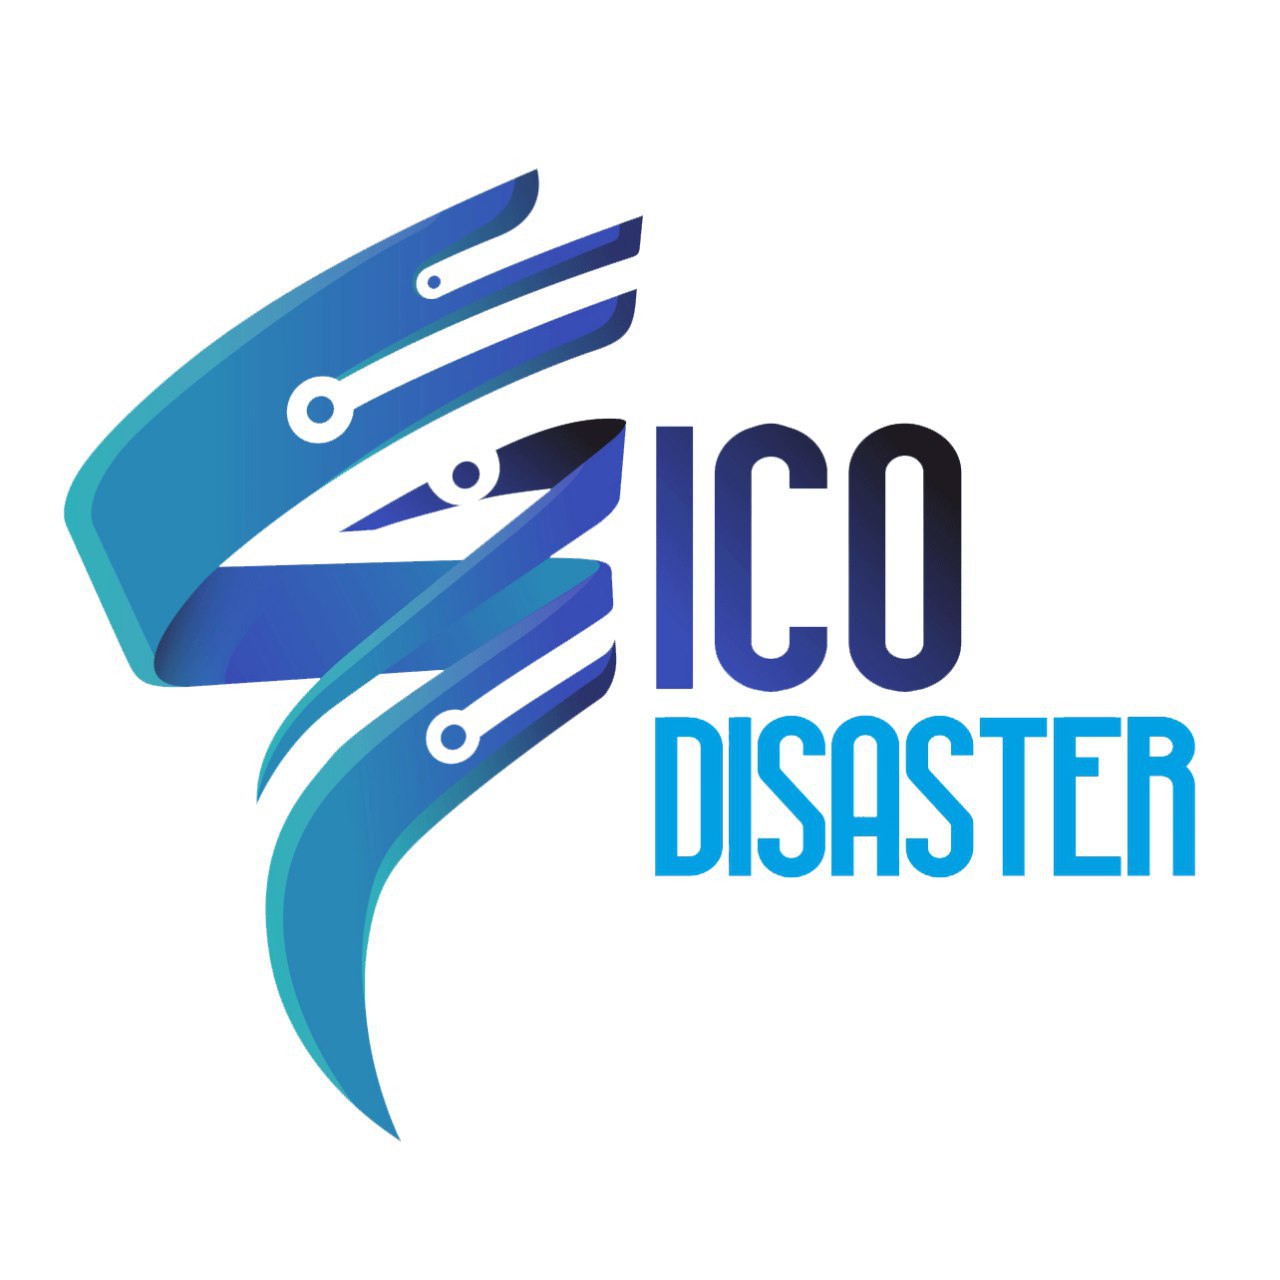 ICO Disaster & Crypto Yoda telegram channels and groups